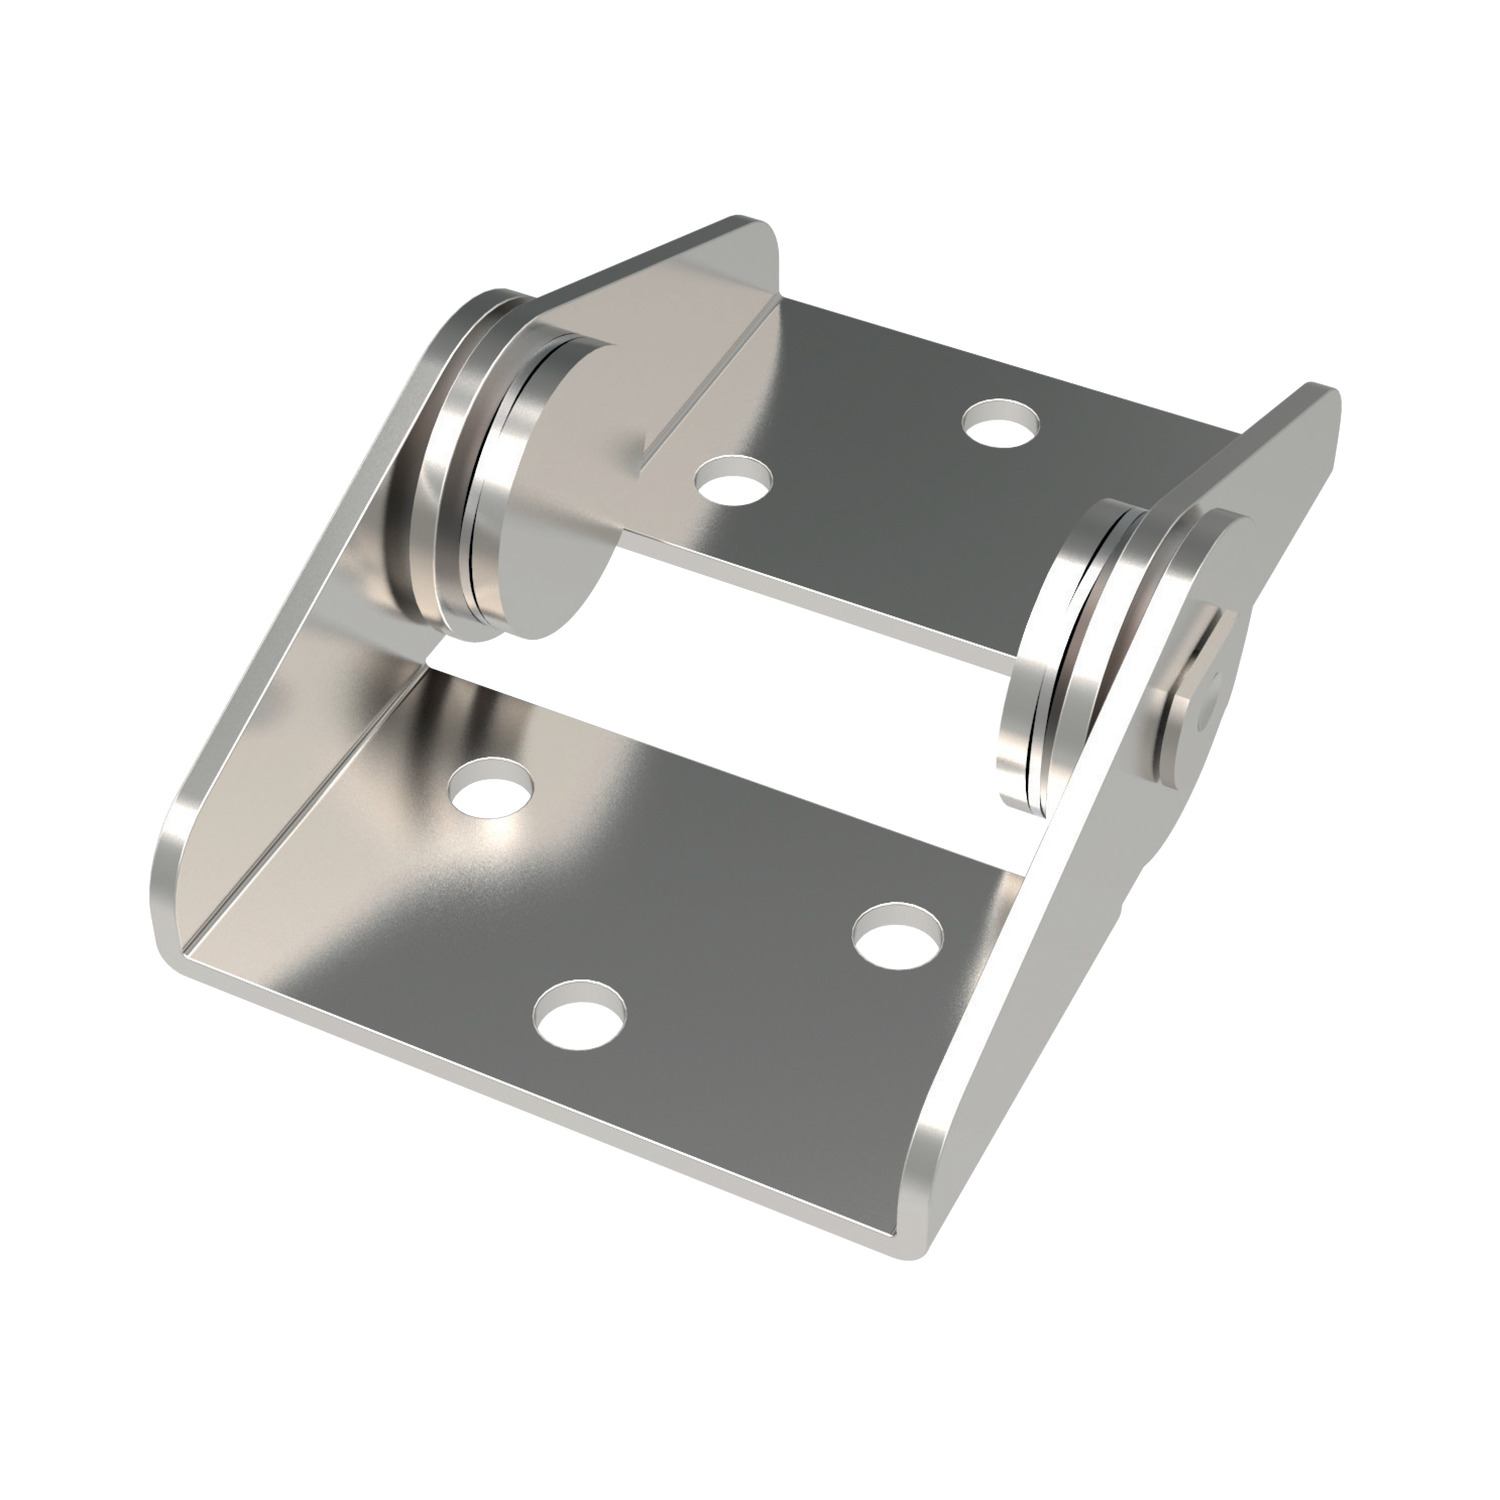 Constant Torque - Friction Hinges Constant torque friction hinges for screw mounting. Applicable torque range of 180°, ideal for holding monitors.